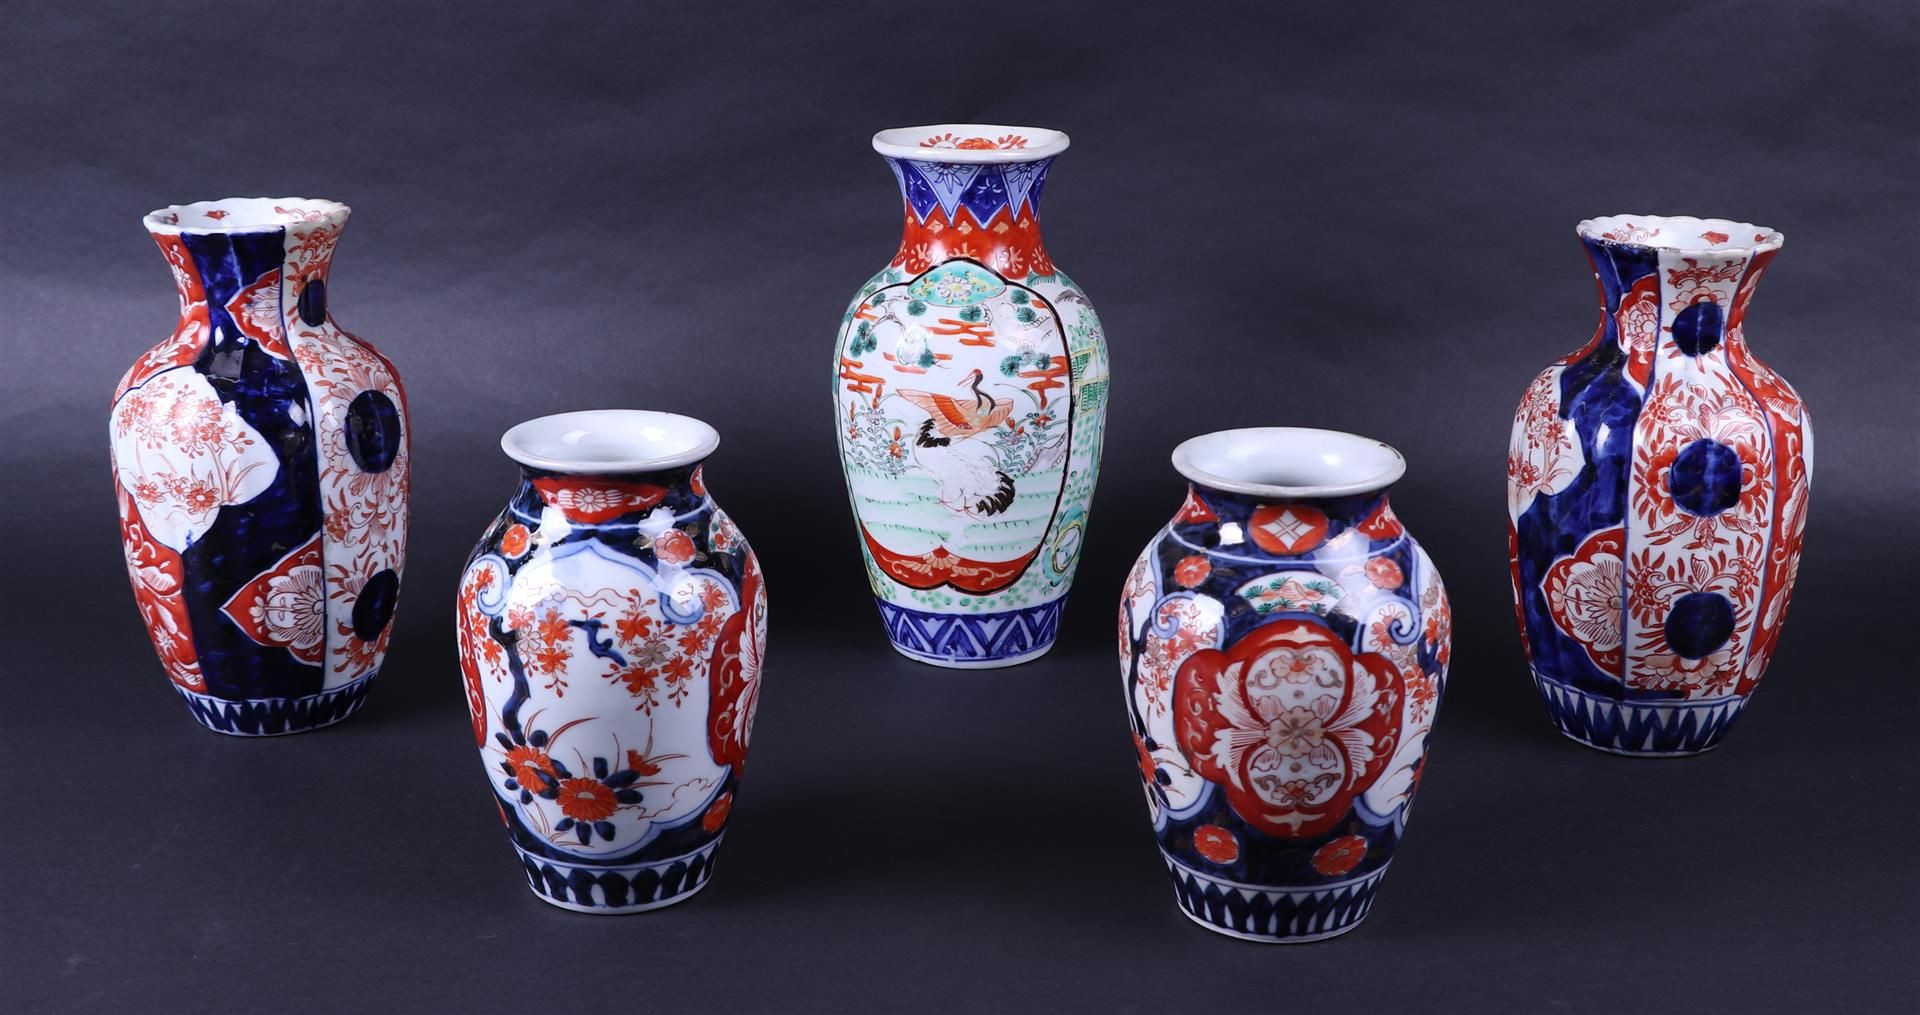 Lot of various Imari vases with floral decor. Japan, 19th century.